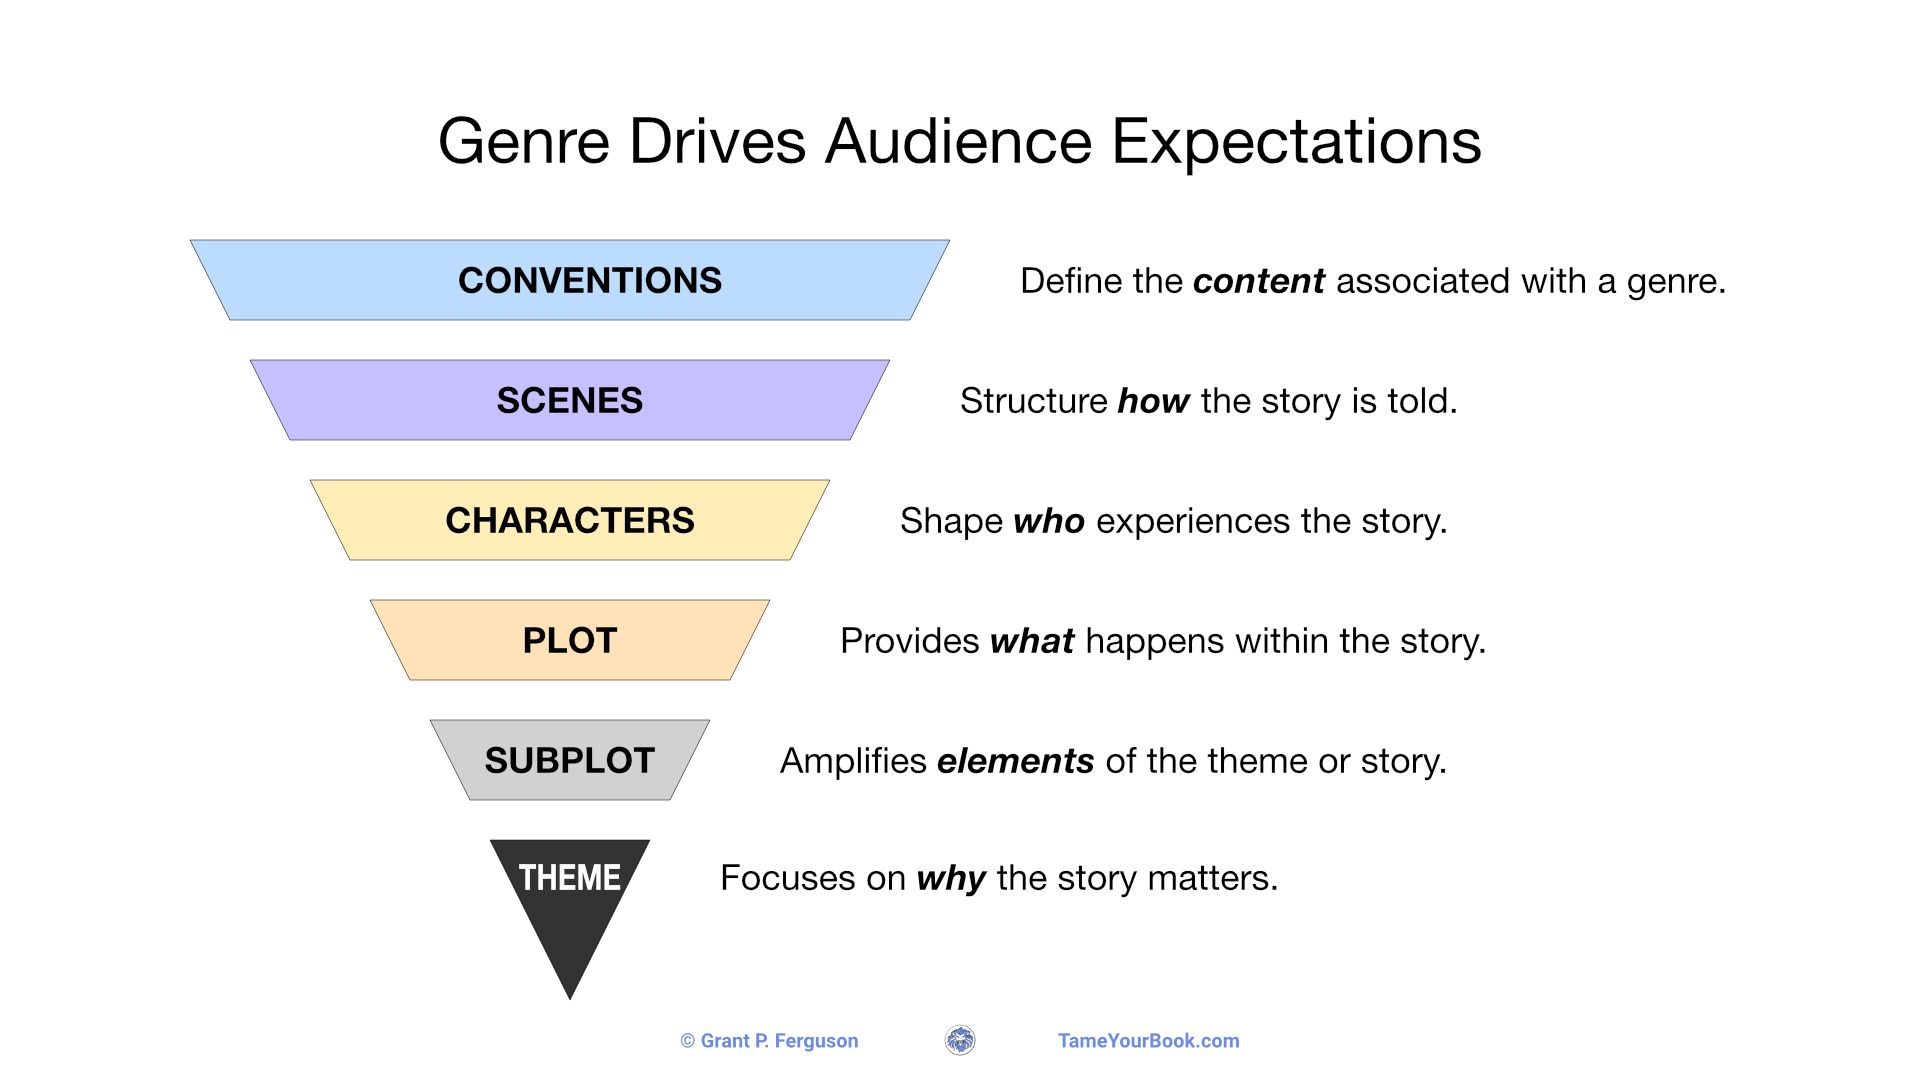 Genre Drives Audience Expectations